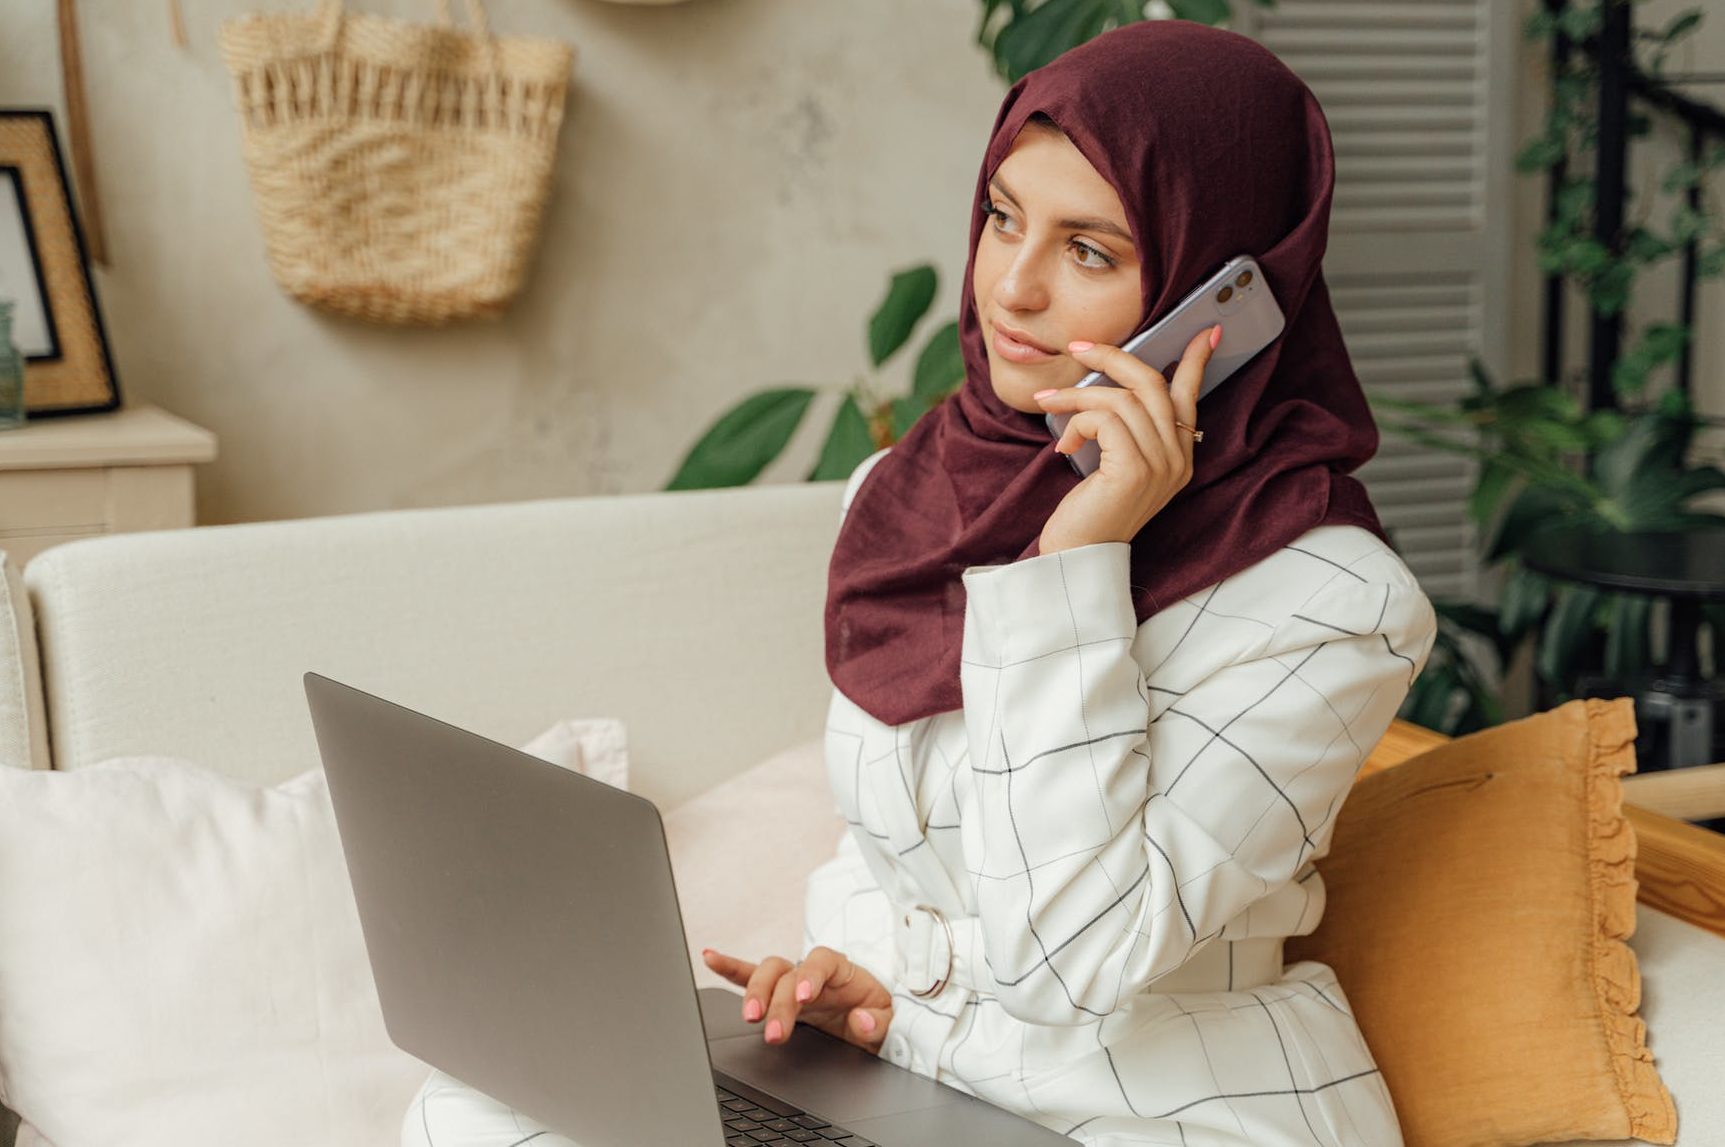 woman in a hijab using a laptop and a smartphone